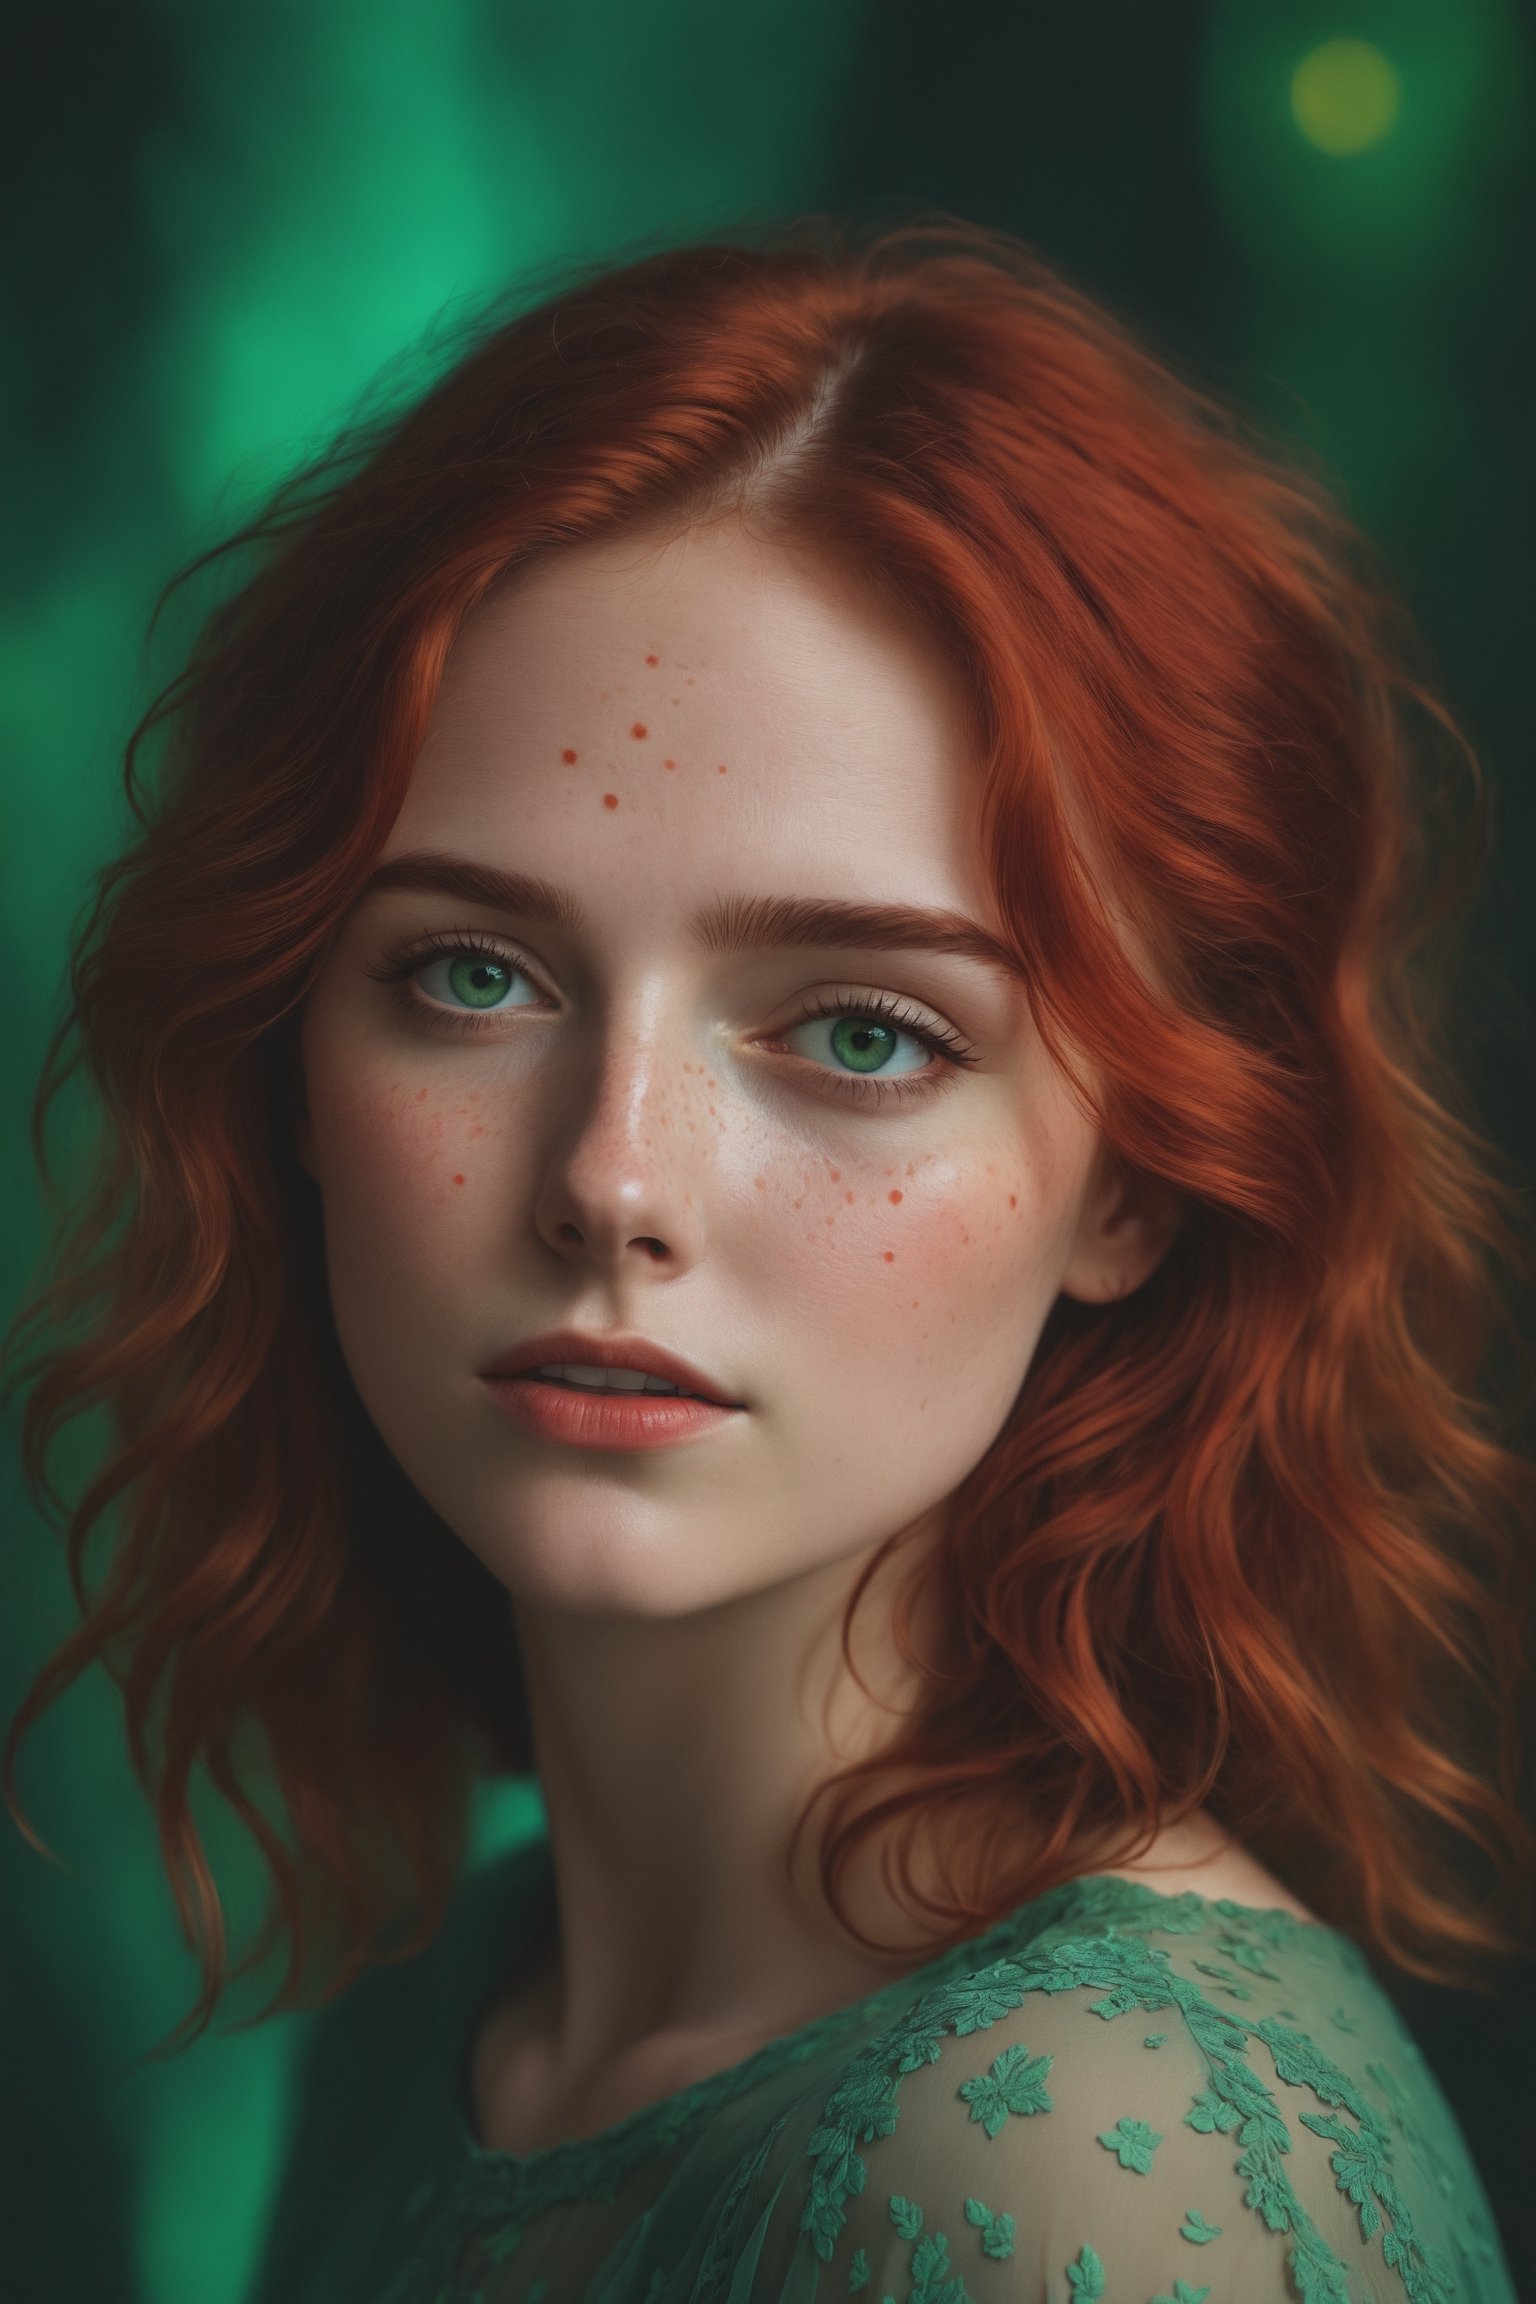 raw realistic potarait of beautiful girlA short, petite frame. Hair so red and wavy falling just past her shoulders, surrounding a circular face with softness, light freckles on her nose, naturally arched red eyebrows over bright green eyes that looked almost blue in some lights., indoor background grainy cinematic, godlyphoto r3al,detailmaster2,aesthetic portrait, cinematic colors, earthy , moody, look , grainy cinematic, fantasy vibes godlyphoto r3al,detailmaster2,aesthetic portrait, cinematic colors, earthy 